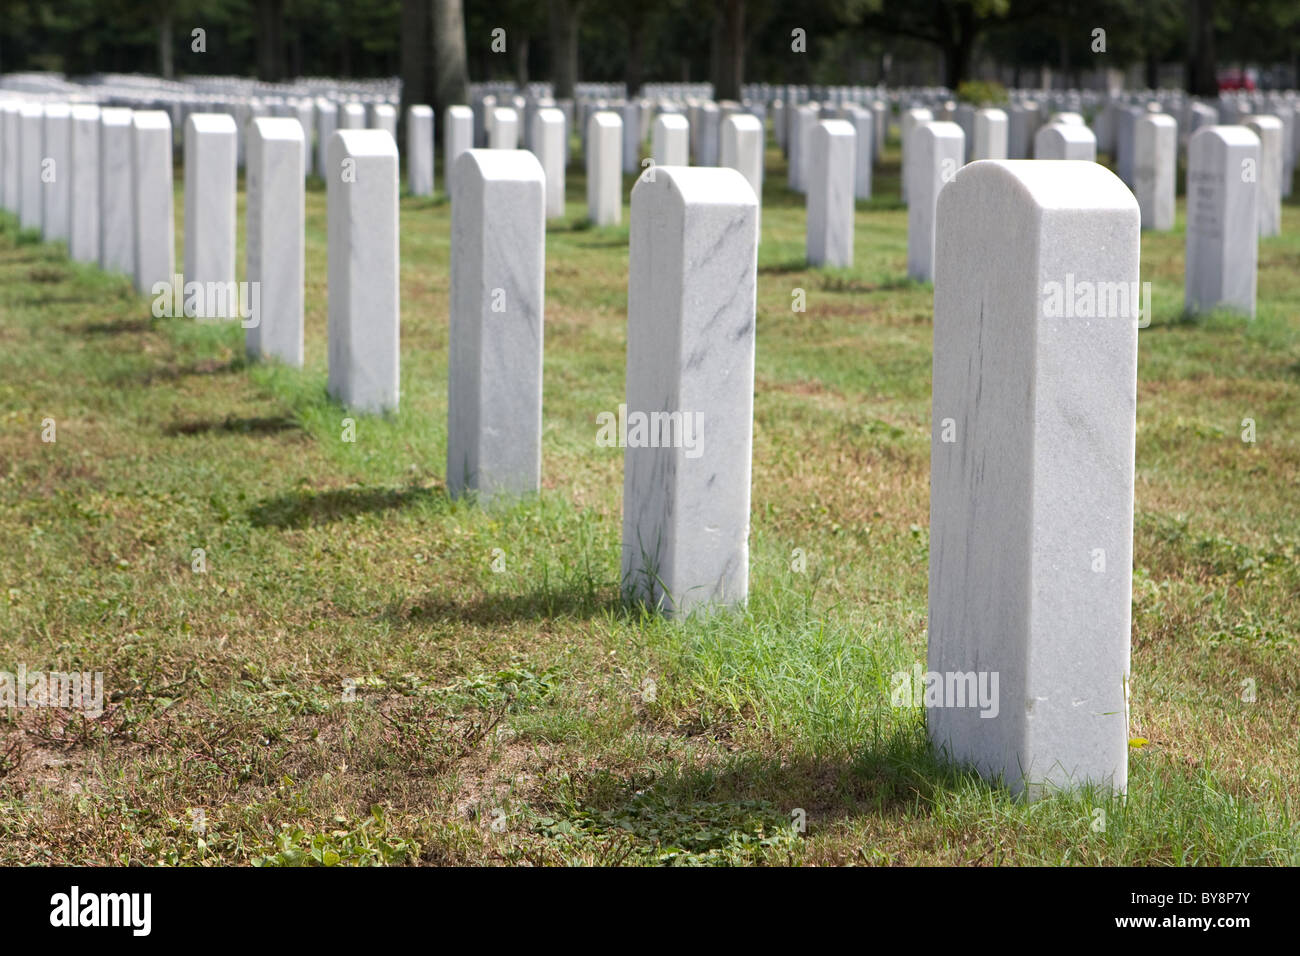 Headstones mark the graves of veterans and their loved ones at Barrancas National Cemetery, Naval Air Station, Pensacola, Florid Stock Photo